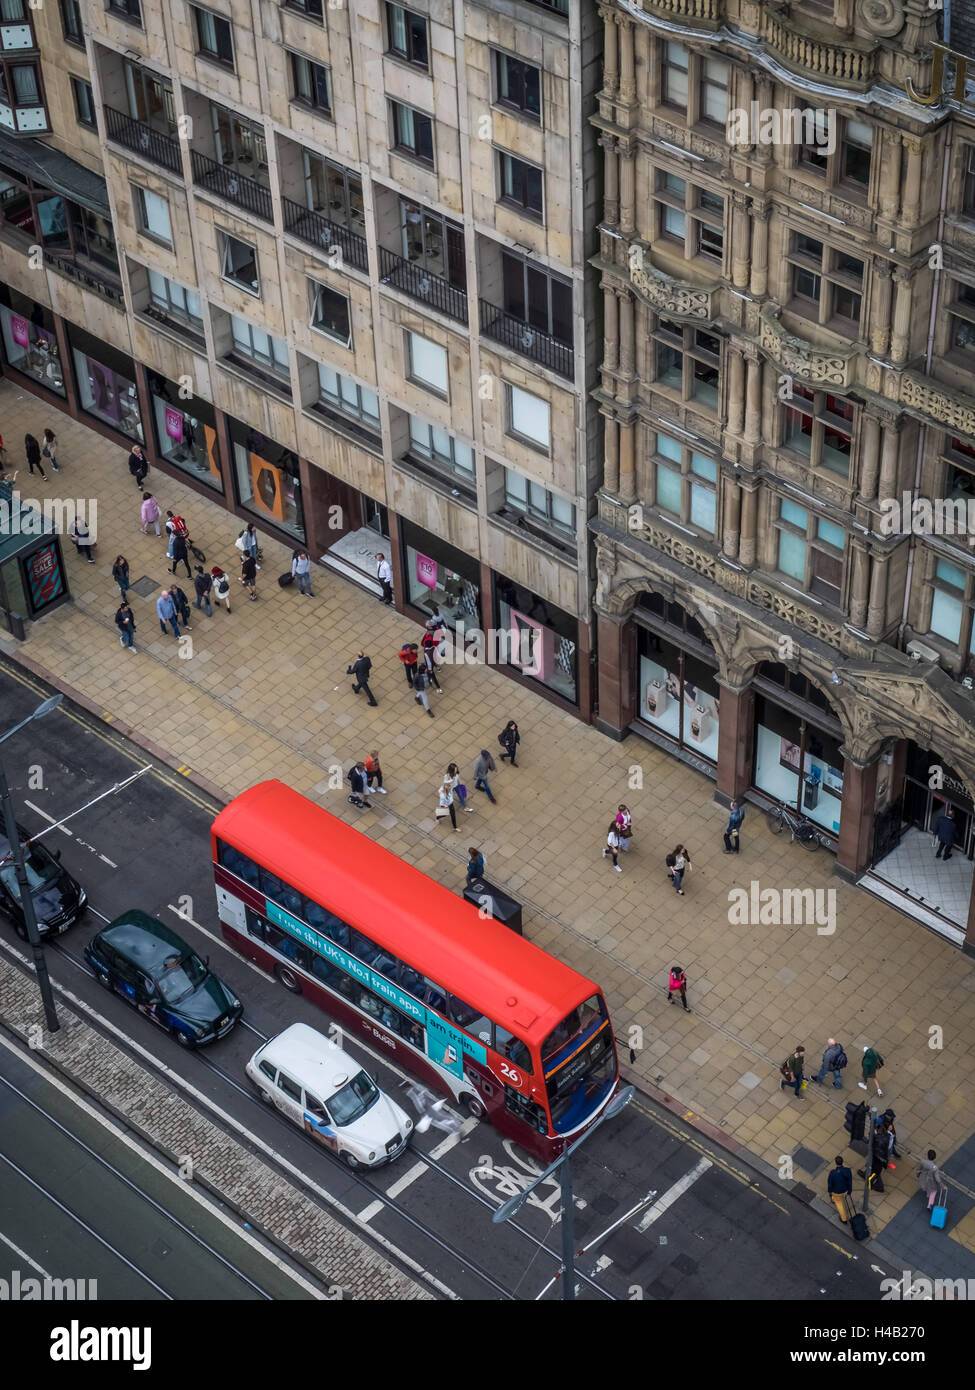 Edinburgh, Scotland -  31 August 2016 : Modern double deck bus operated by Lothian busses in the centre of Edinburgh, Scotland Stock Photo